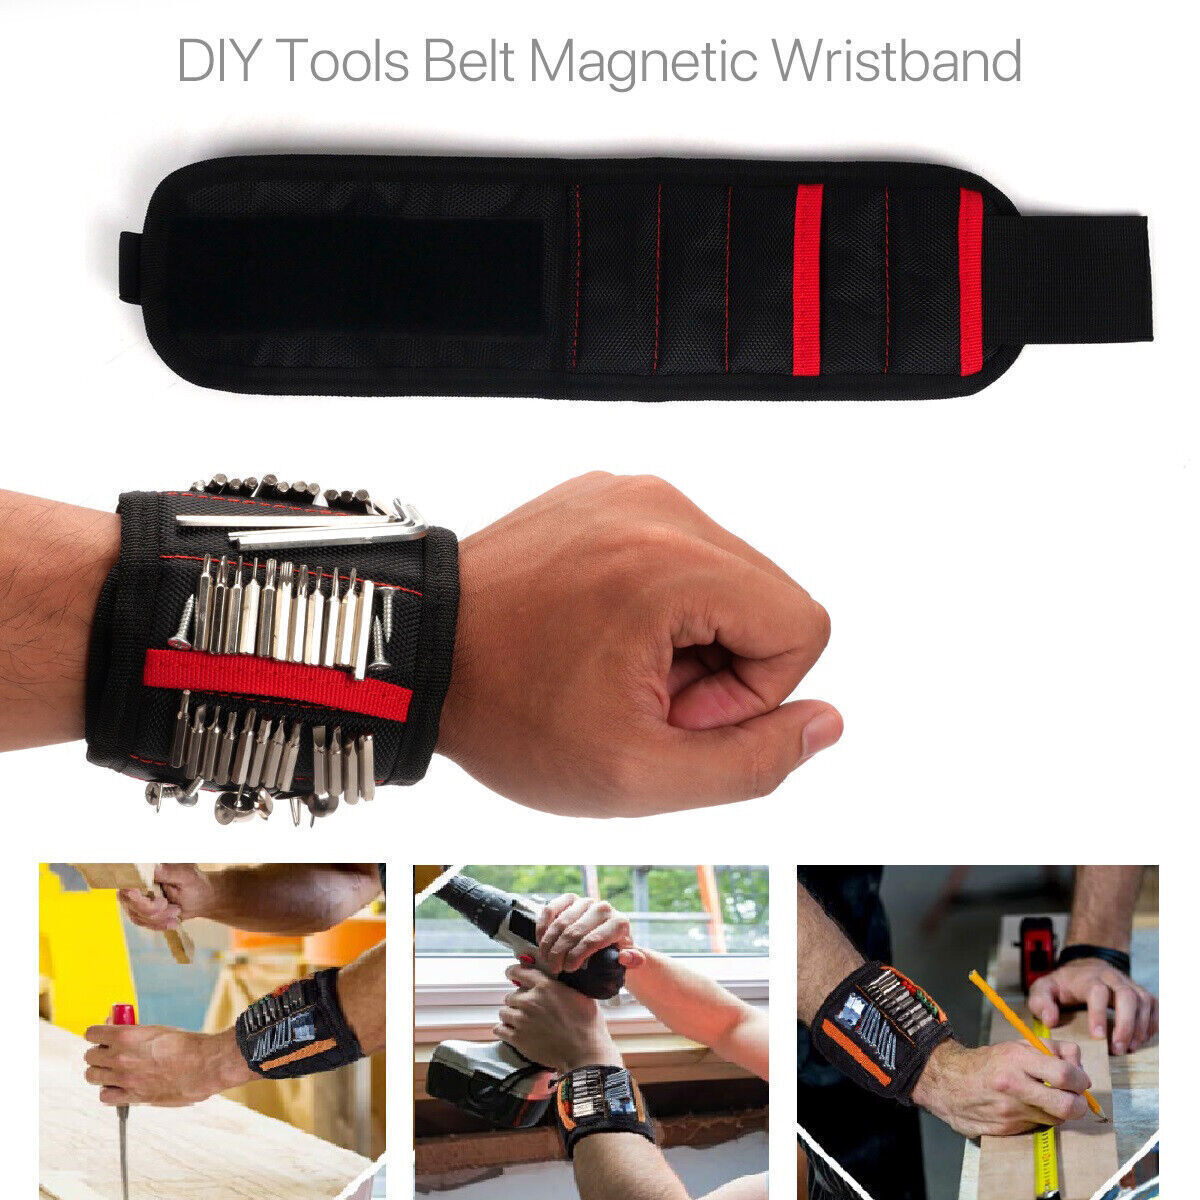 Magnetic Wristband Diy Belt Strong Magnets For Holding Wrench Screw Handyman